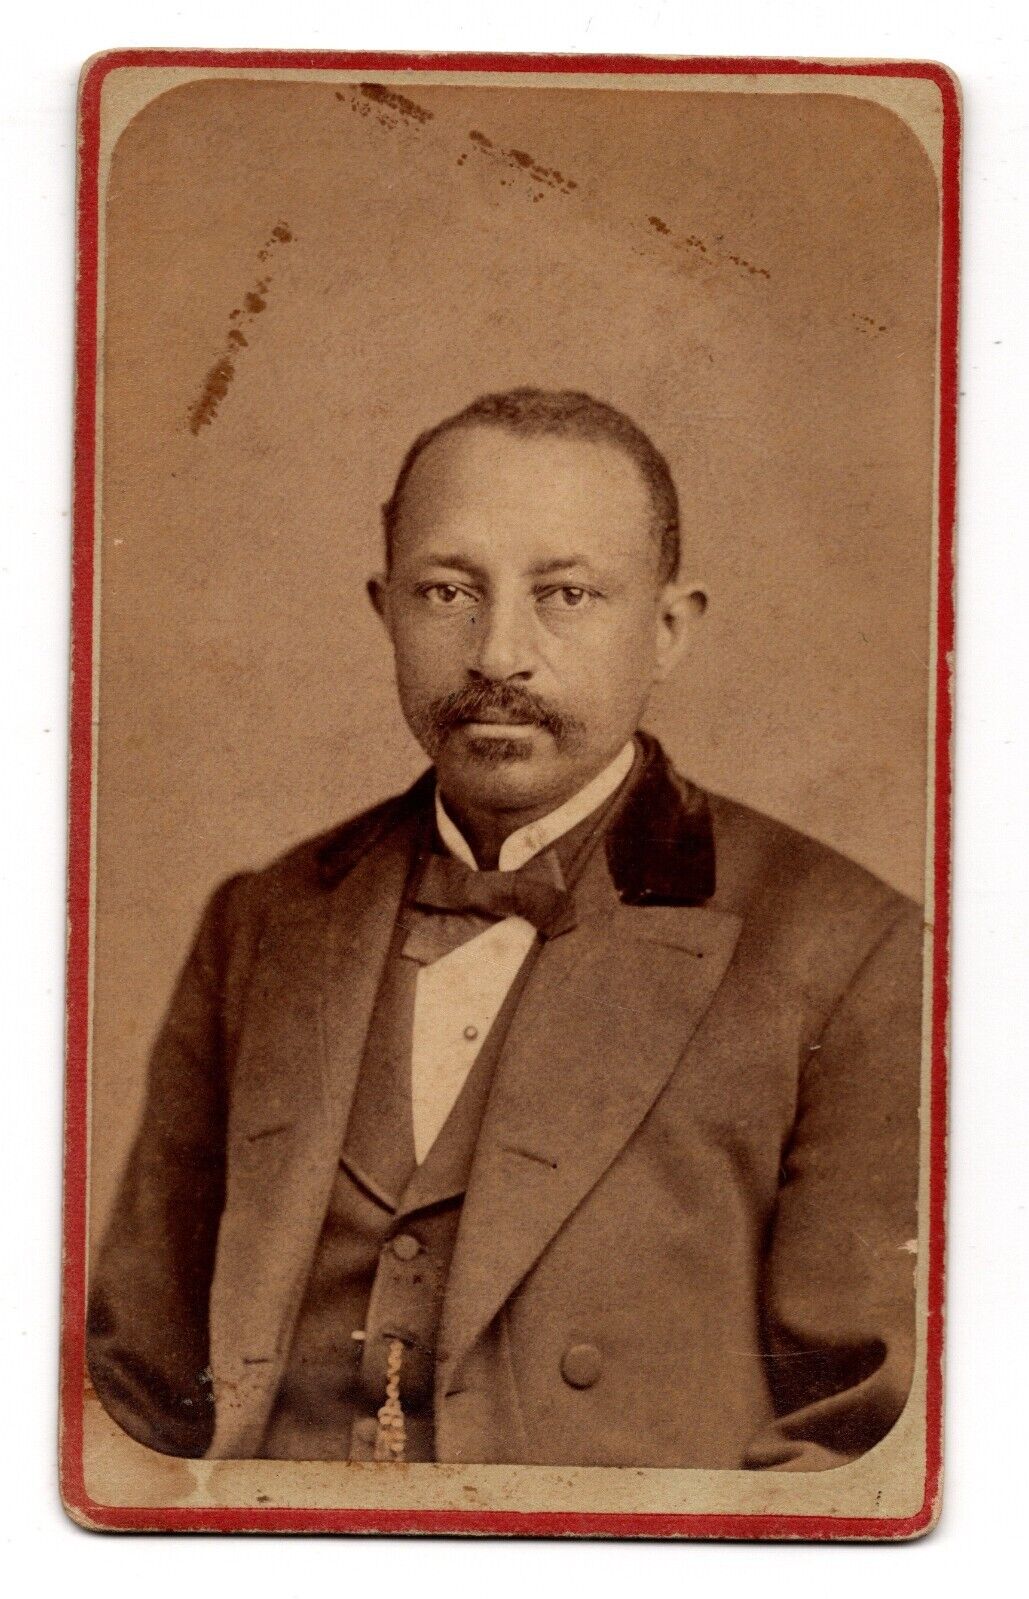 ANTIQUE CDV C. 1880s HANDSOME AFRICAN AMERICAN MAN WITH MUSTACHE WASHINGTON D.C.